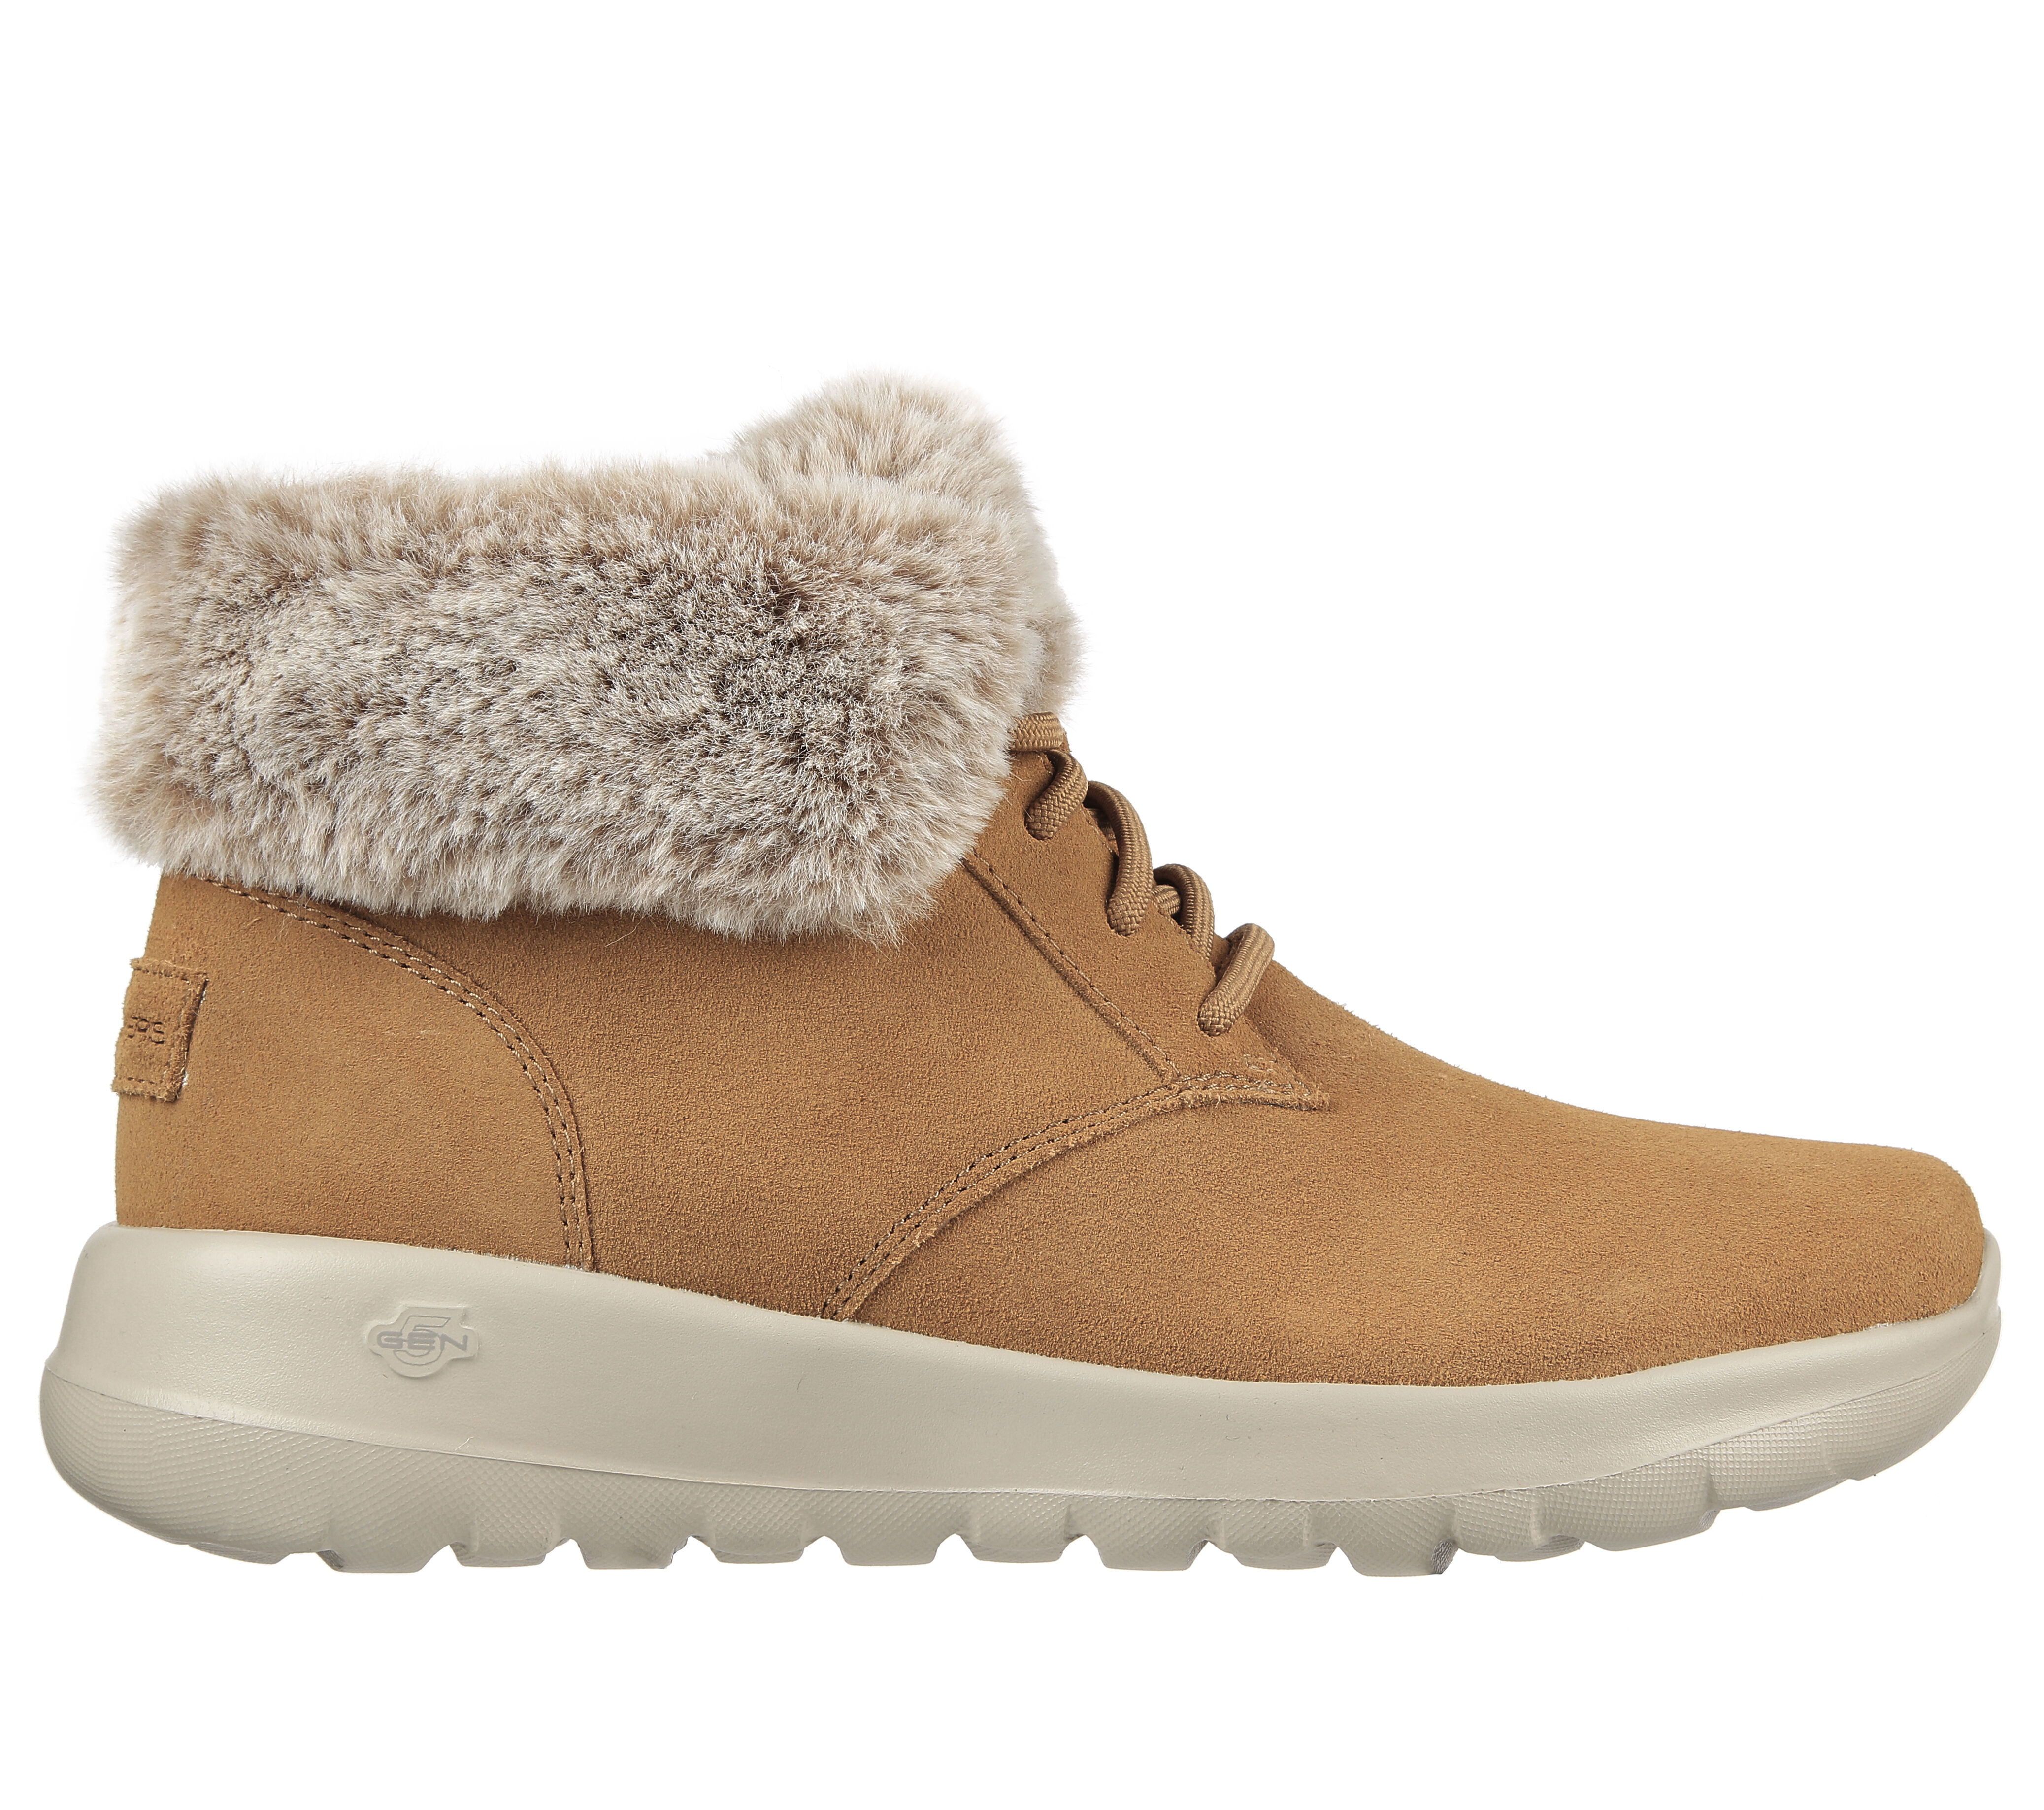 skechers clearance boots